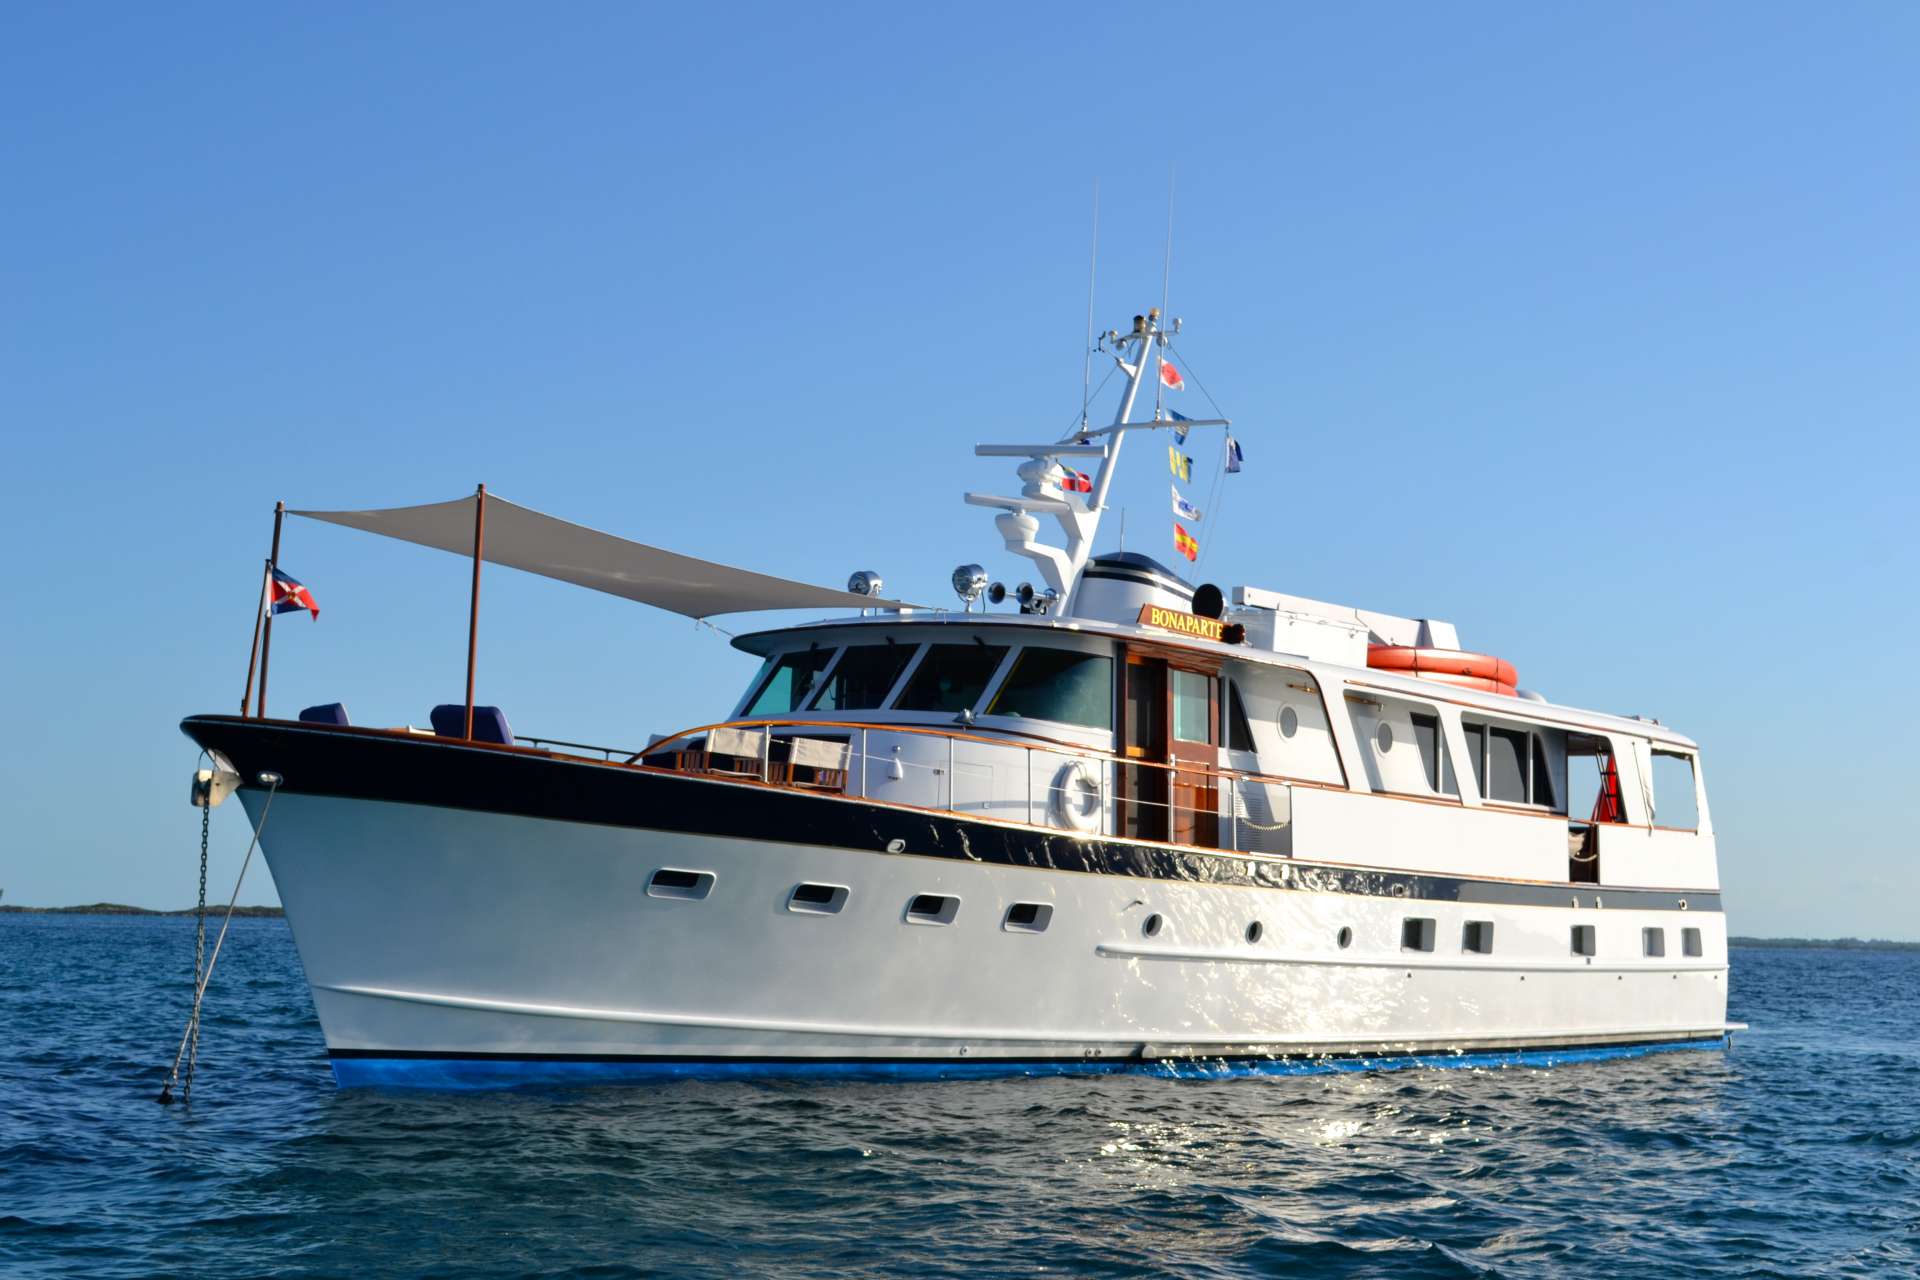 M/V BONAPARTE is a successful charter yacht since 2014 based in Nassau Bahamas. BONAPARTE is owner operated by Capt Francois and Chef Annette plus one additional crew Member for a service level equivalent to a much larger yacht . After an extensive 14 month refit in 2014  she has been maintained in Bristol condition with an extensive yearly refit program since then.

Everyone enjoy the sight of a classic yacht:  The woodwork, the impeccably varnished mahogany cap rail, the timeless beauty of Sparkman and Stevens design. In addition to tastefully decorated accommodations, guests particularly enjoy relaxing on the large forward teak deck protected by a sun awning. Guests stretch out on the cushioned bow seats to read, relax and daydream in the balmy breezes.  A teak table and captain's chairs are easily set up for comfortable dining for 8 on the foredeck.  The weather-protected aft deck is the ideal romantic setting for al fresco dining with newly upholstered seating for up to 10 people.

M/V BONAPARTE provides well-appointed accommodations for 6 guests in 3 aft cabins:  The en suite master has a King bed, the VIP has a Queen and the guest cabin has a double bed.  The VIP and Guest cabin share the second head and shower. all cabins have individual A/C controls.  Granite counters and vessel sinks add a contemporary touch of luxury.

Annette and Francois have been manning this ship for the last 6years. they are very personable and congenial hosts. Sophisticated, outgoing and discrete, they are always attuned to their guests' moods. They enjoy sharing their passion for yachting, creating memorable moments and pampering their guests from sun-up to sundown. They have found all the best anchorages and snorkeling spots in the Exumas and have become friends with many charming Bahamians who enjoy sharing all the islands have to offer with visitors.

Annette and Francois excel in creating a magical atmosphere on board, helping their guests to 'decompress' from their demanding lifestyles and reconnect with their inner child.  'Playtime in paradise' starts early in the day and continues well into the evening onboard M/V Bonaparte.  Enjoy the Bahama's crystal clear waters to the fullest with all the water toys - snorkel gear for everyone, 2 tandem kayaks, 2 SUP's for exploring and a dive compressor for Certified divers.

M/V BONAPARTE has stabilizers and cruises at 9 knots with economical fuel consumption of 16 GPH.  AC throughout. 